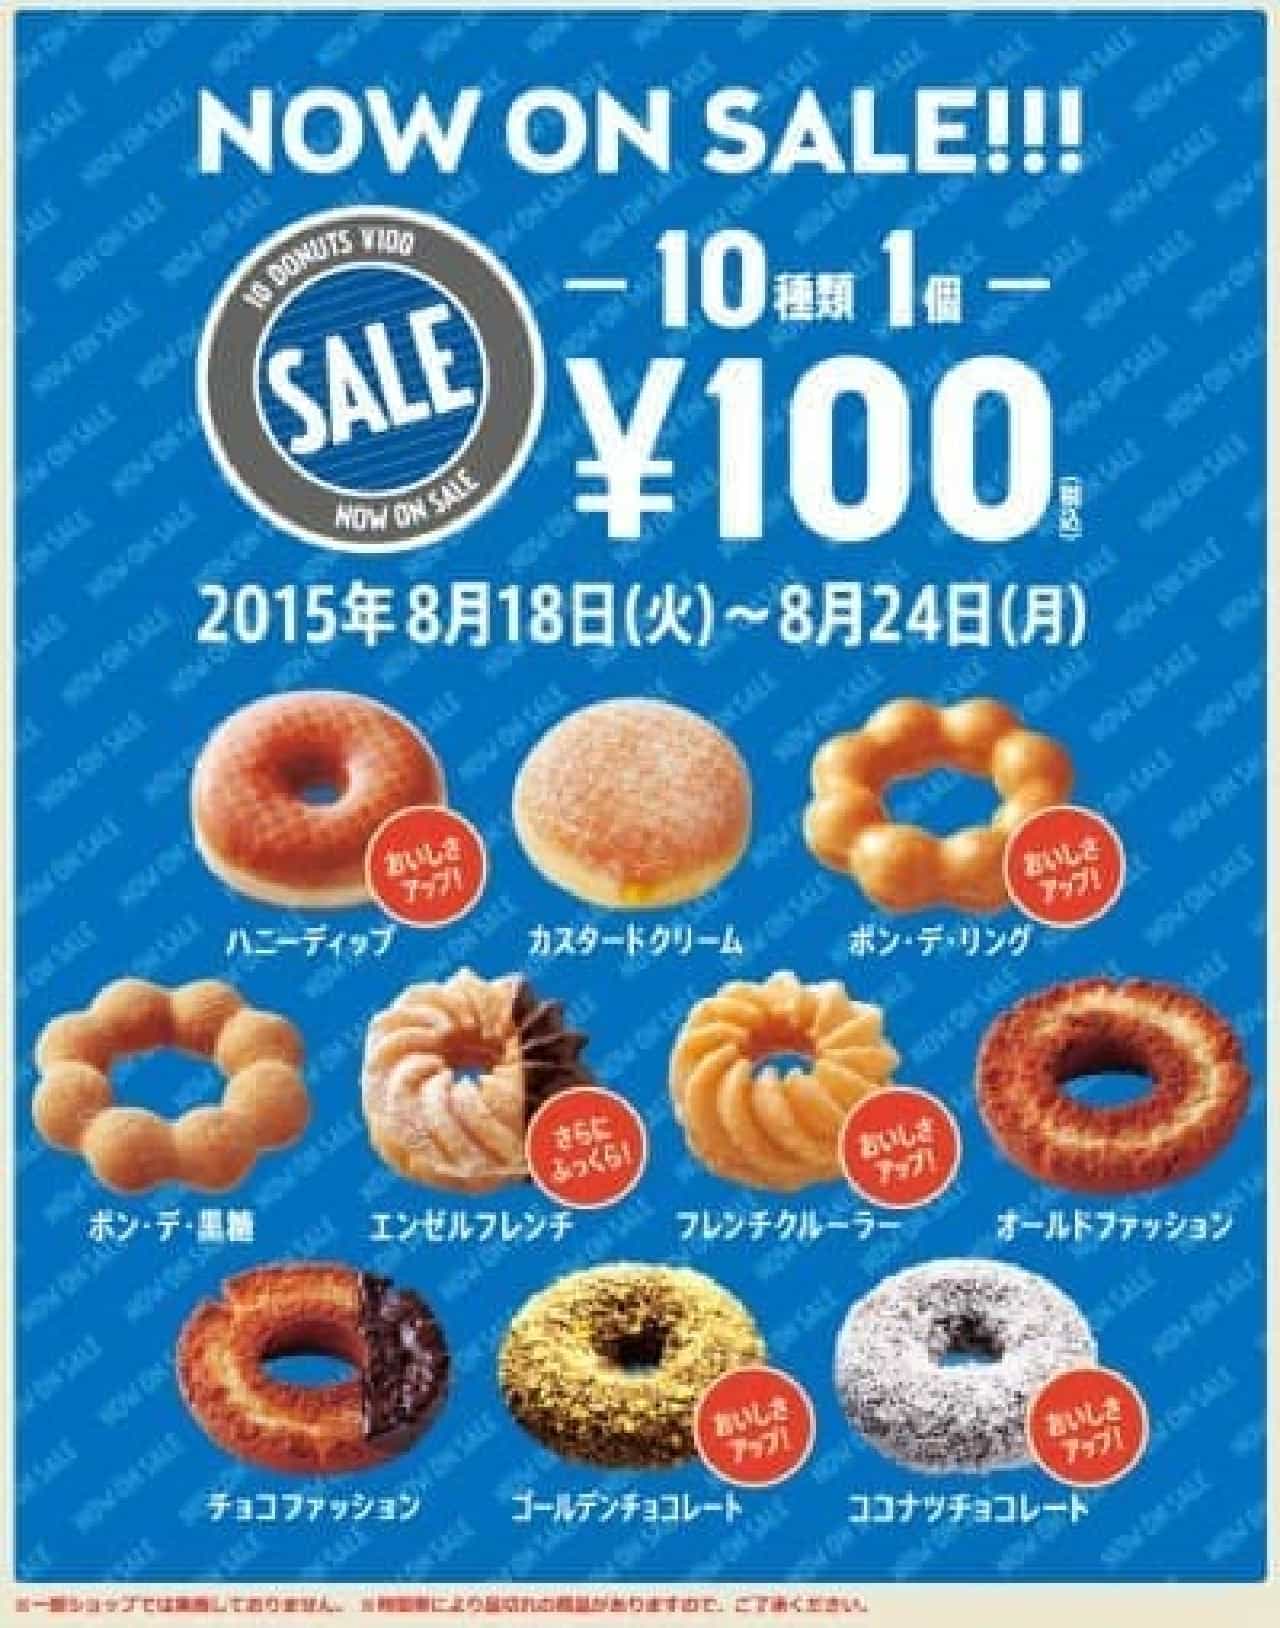 If you are interested, please take this opportunity! (Source: Mister Donut official website)